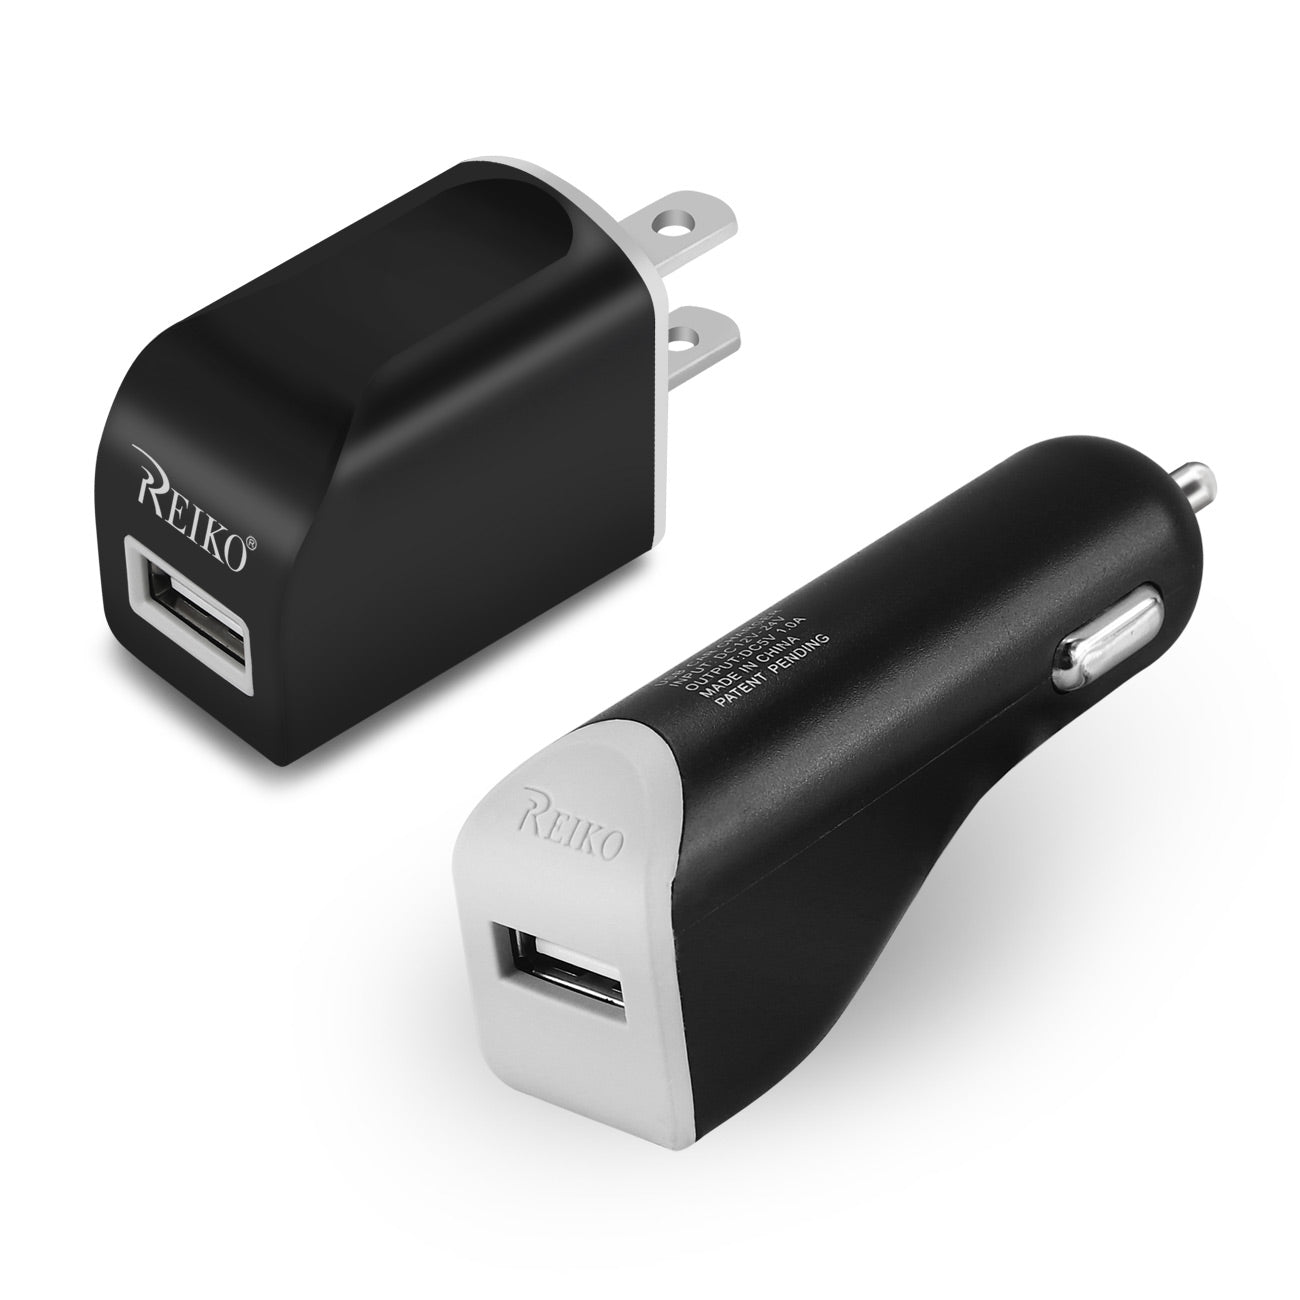 Car Charger Wall Adapter Micro With Cable USB 3-In-1 Reiko 1A Black Color